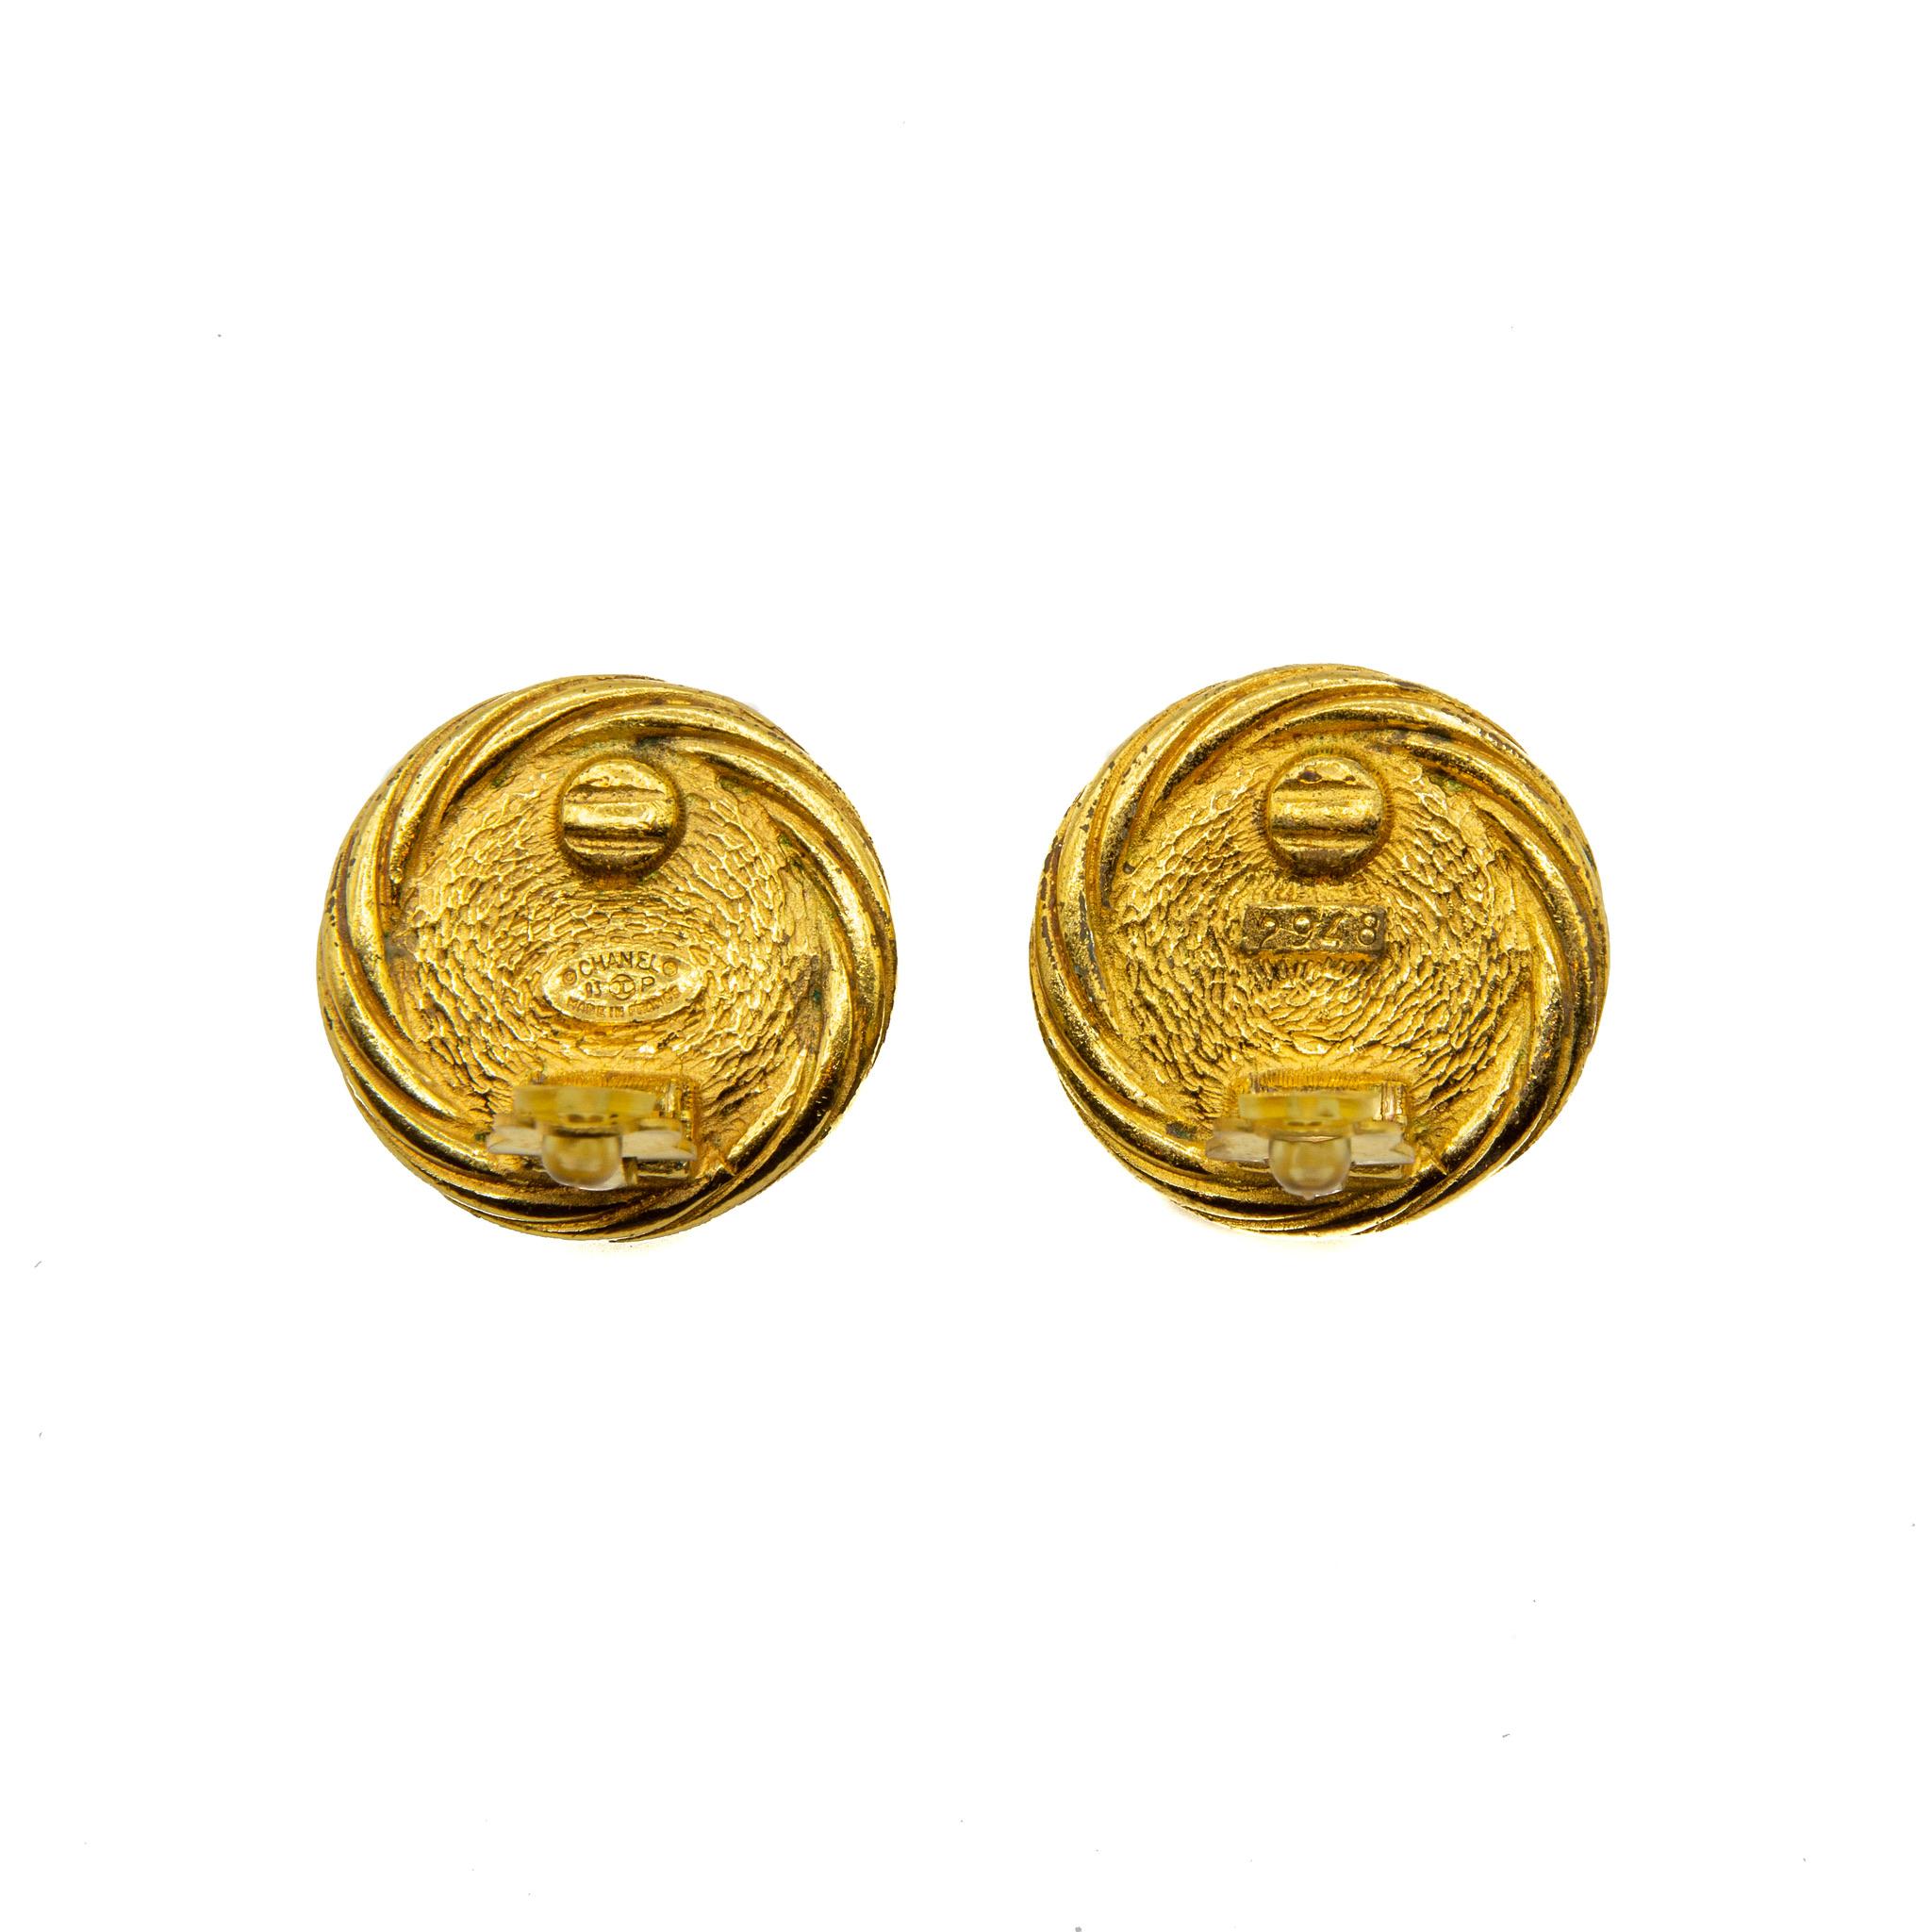 Chanel Gilt and Faux Pearl Spring 1993 Clip-on Earrings. Featuring twisted design in gold-coloured gilt encapsulating the faux pearl and the house logo stamped below. This piece features the Chanel authenticity plaque. Provenience France. 